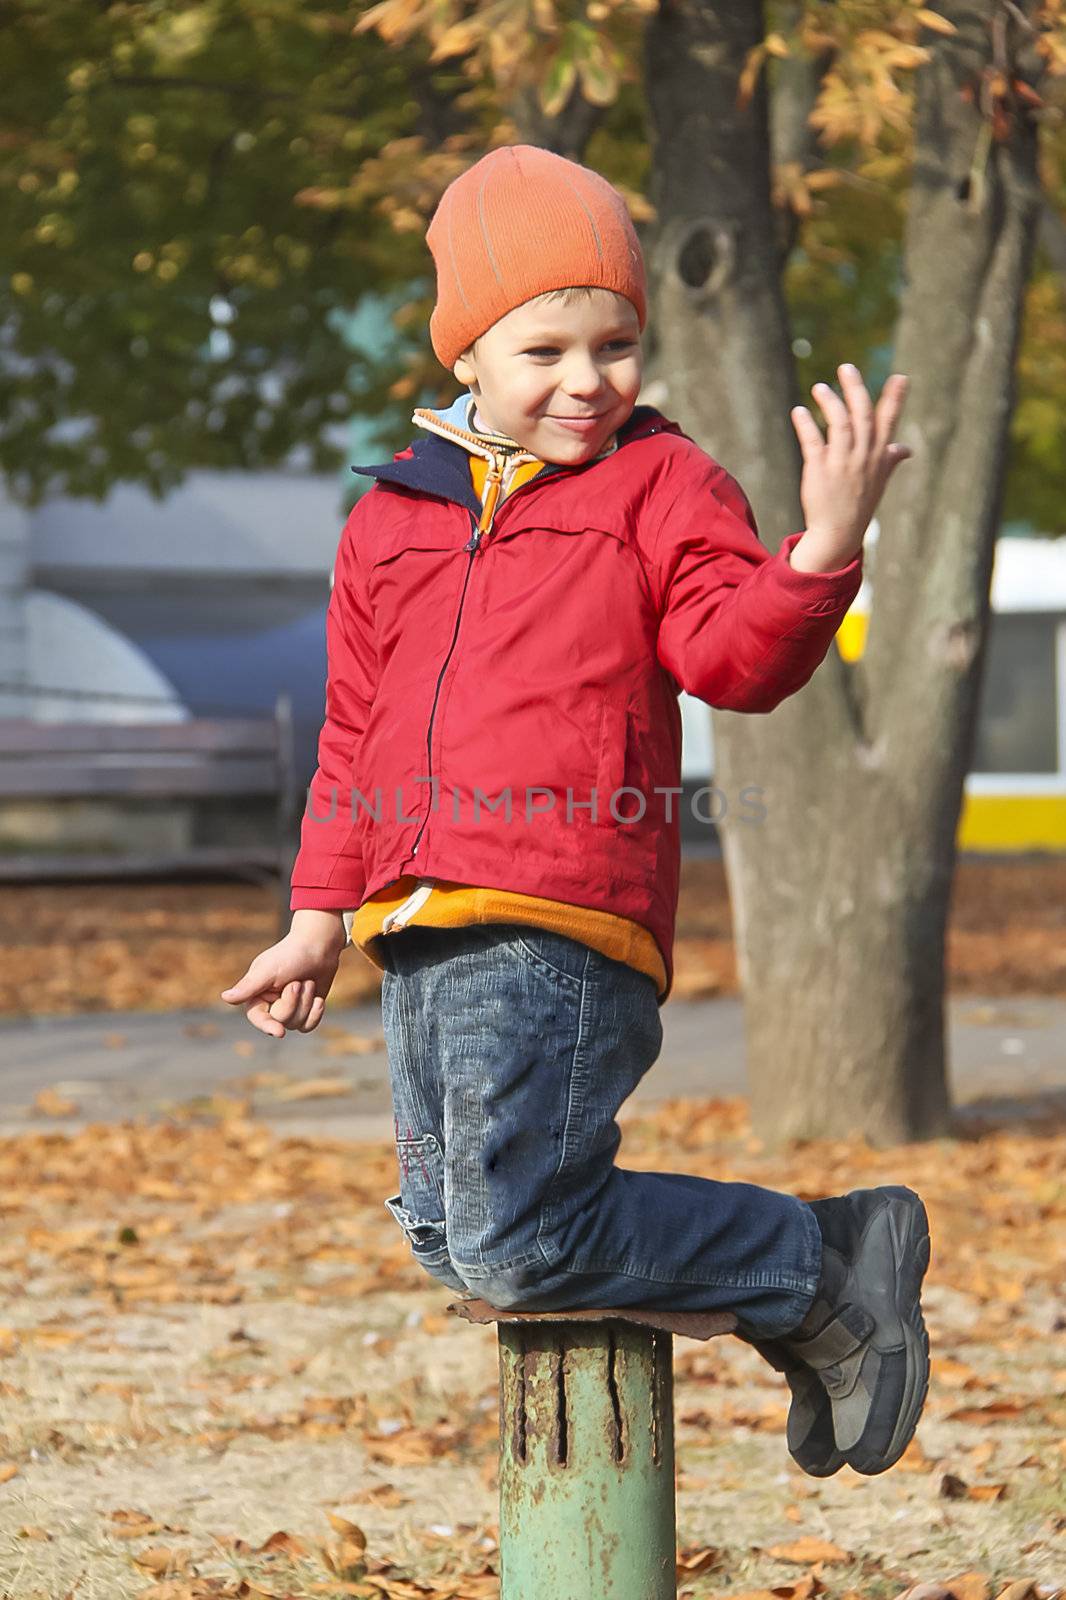 Cheerful babe posing, playing in autumn park by NickNick